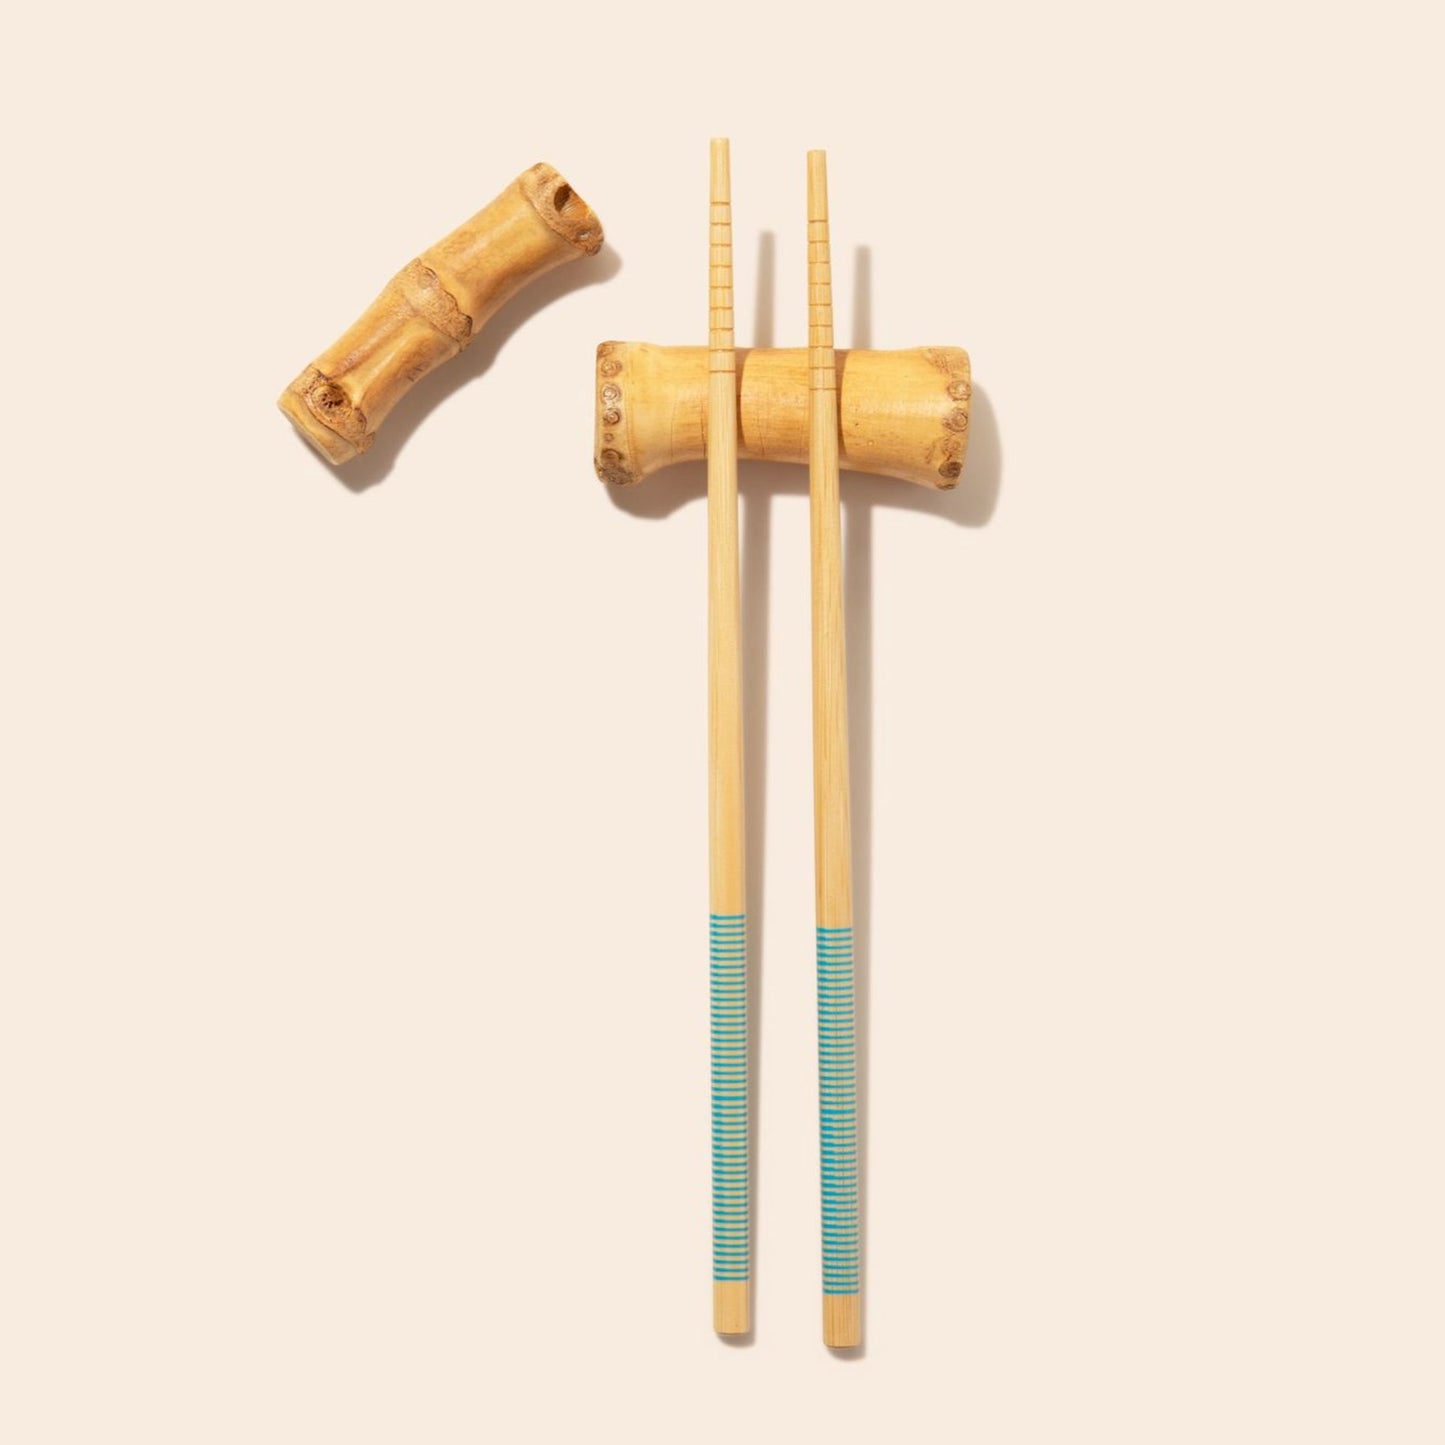 sustainable, zero waste, earth-friendly, plastic-free Bamboo Root Chopstick Rest - Bamboo Switch